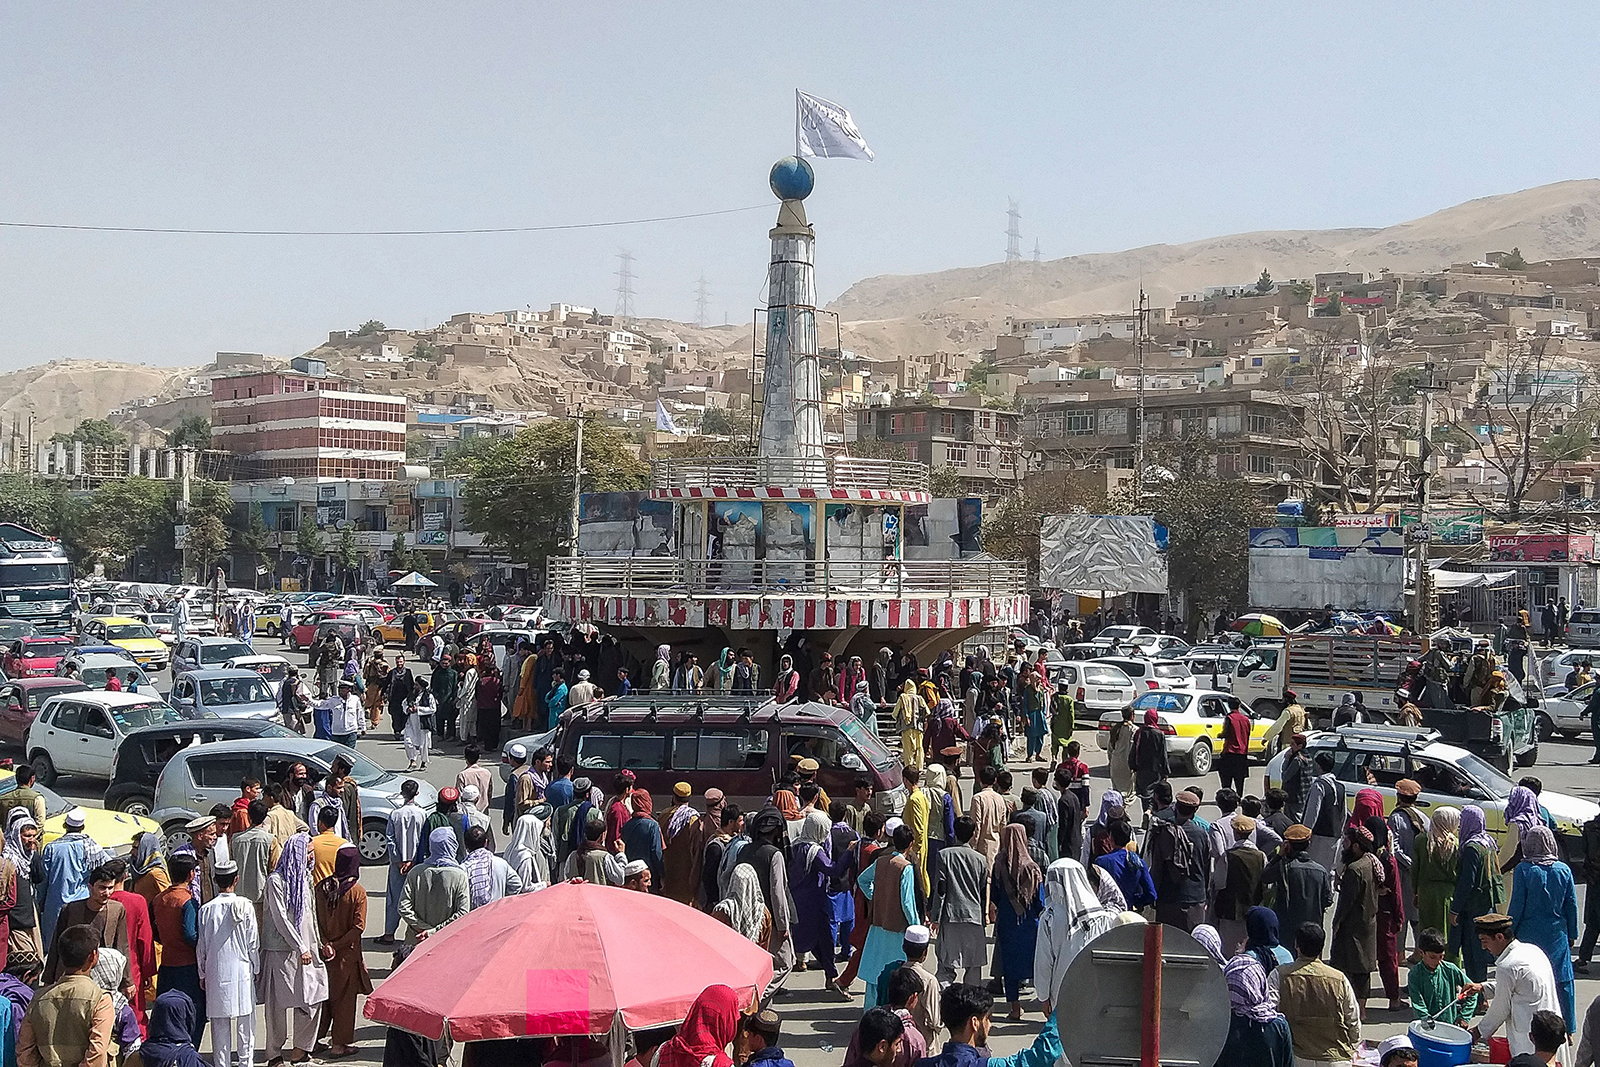 A Taliban flag is seen on a plinth with people gathered around the main city square at Pul-e-Khumri on August 11.